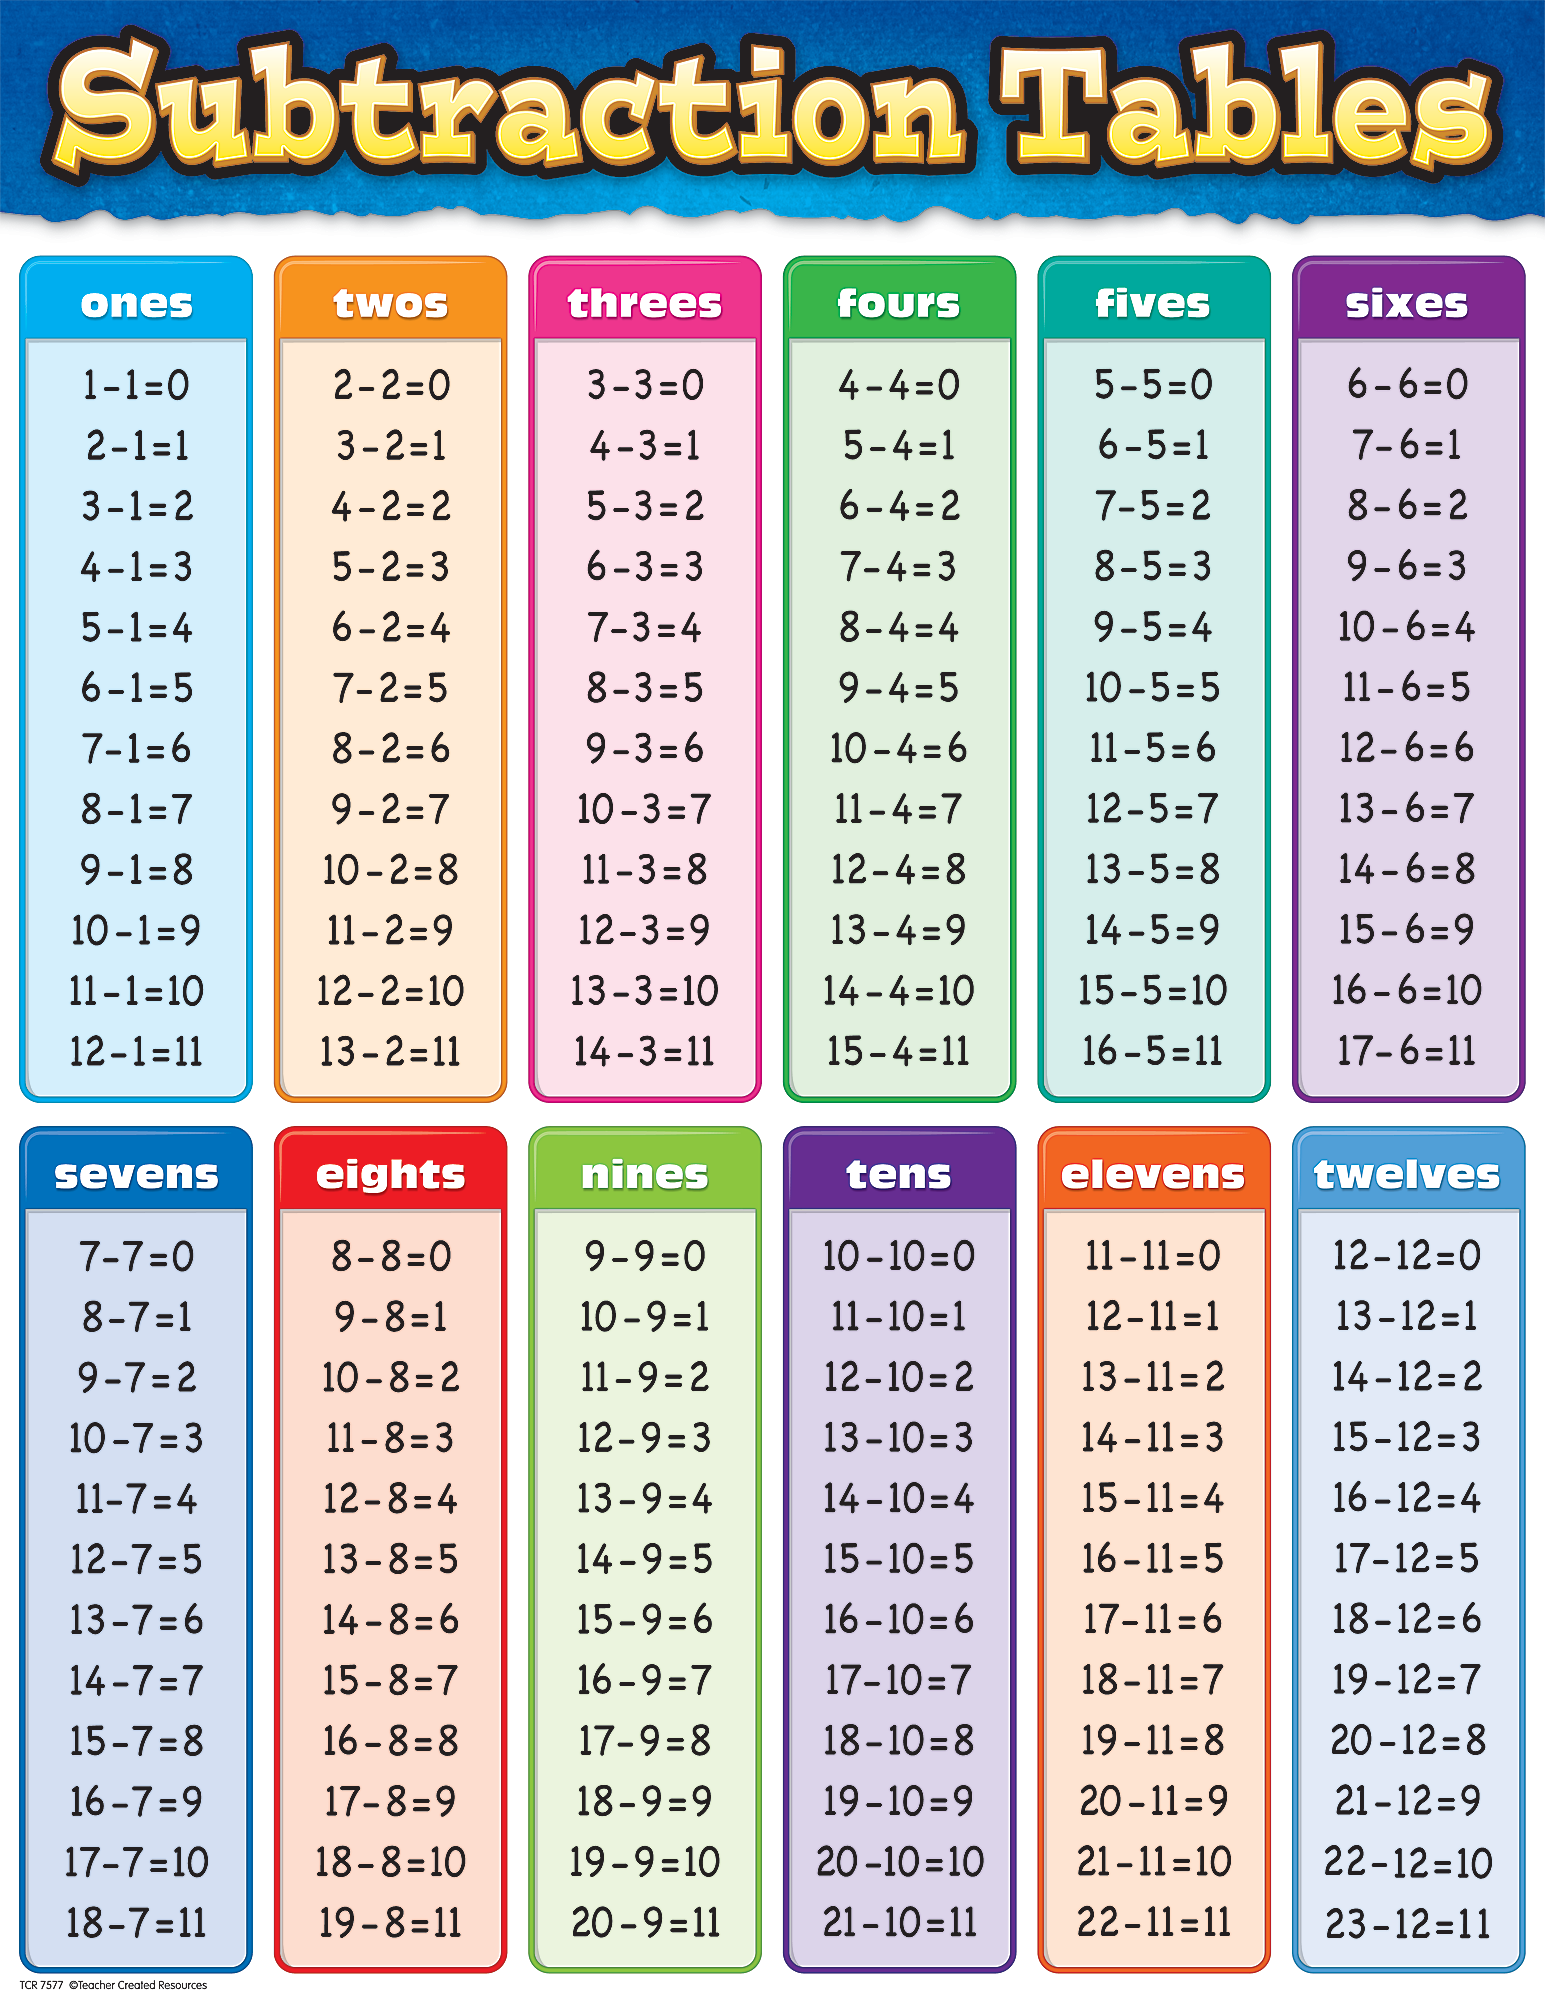 Subtraction Tables Chart - TCR7577 | Teacher Created Resources